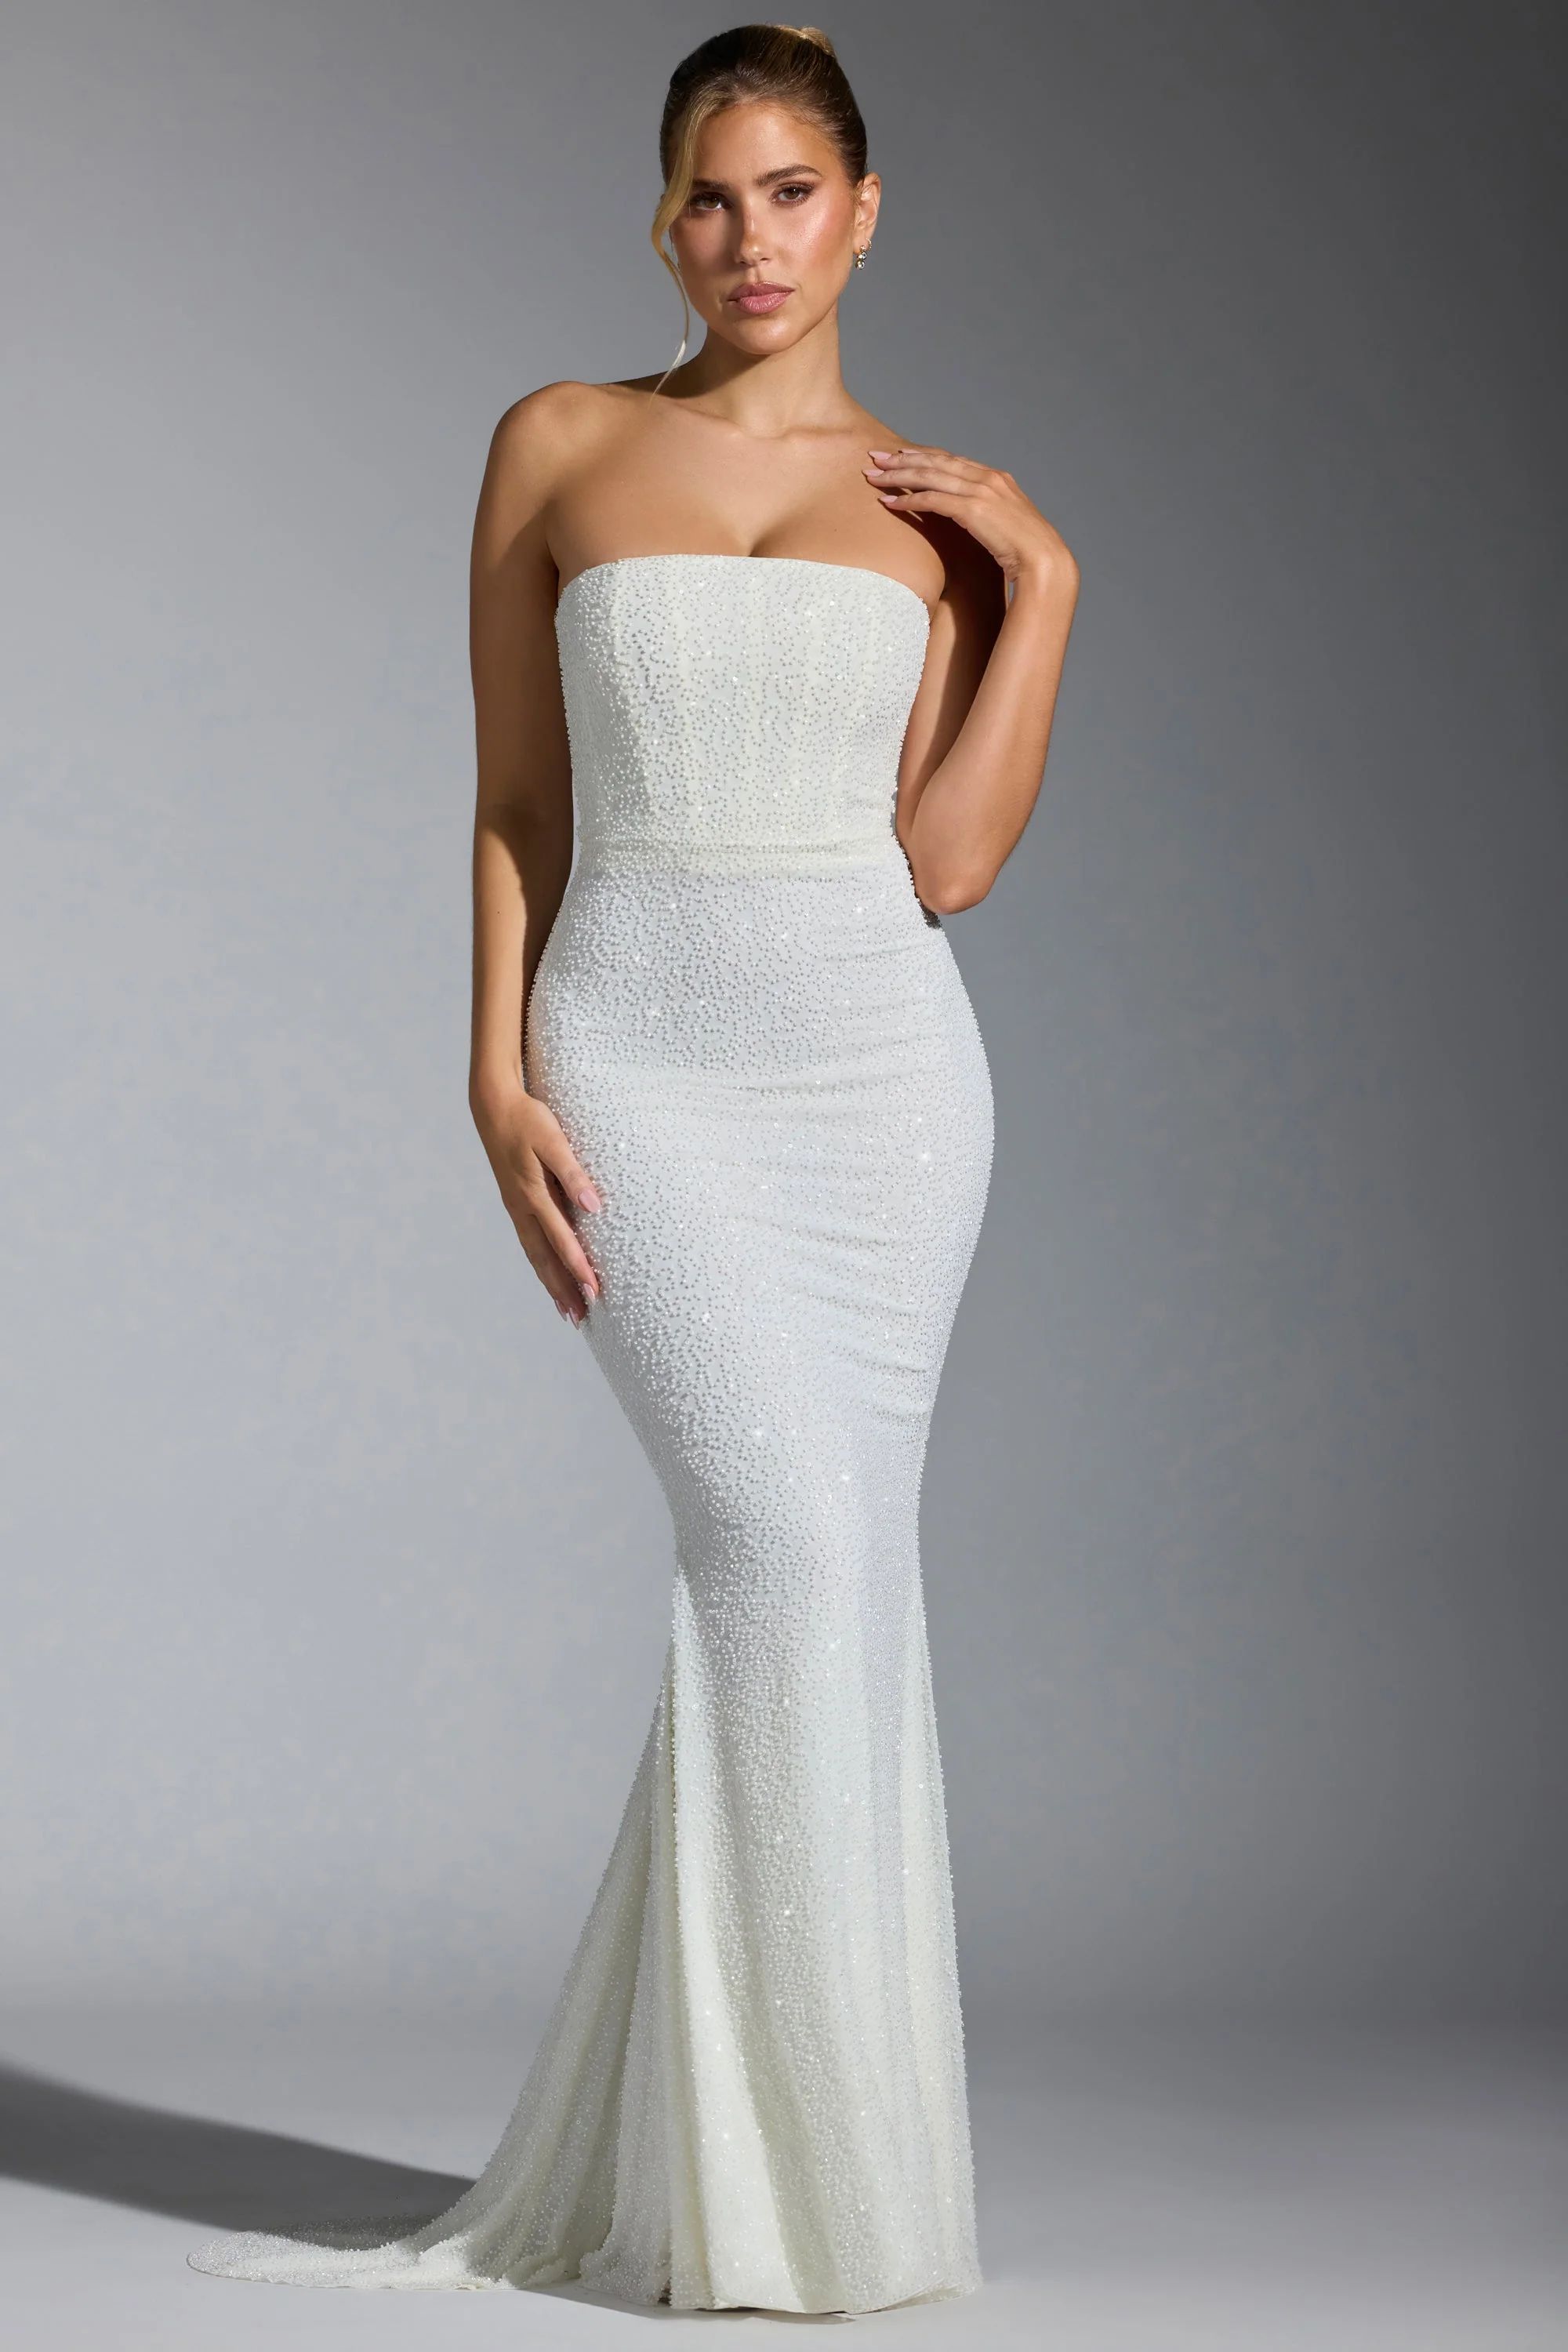 Embellished Corset Gown in White | Oh Polly